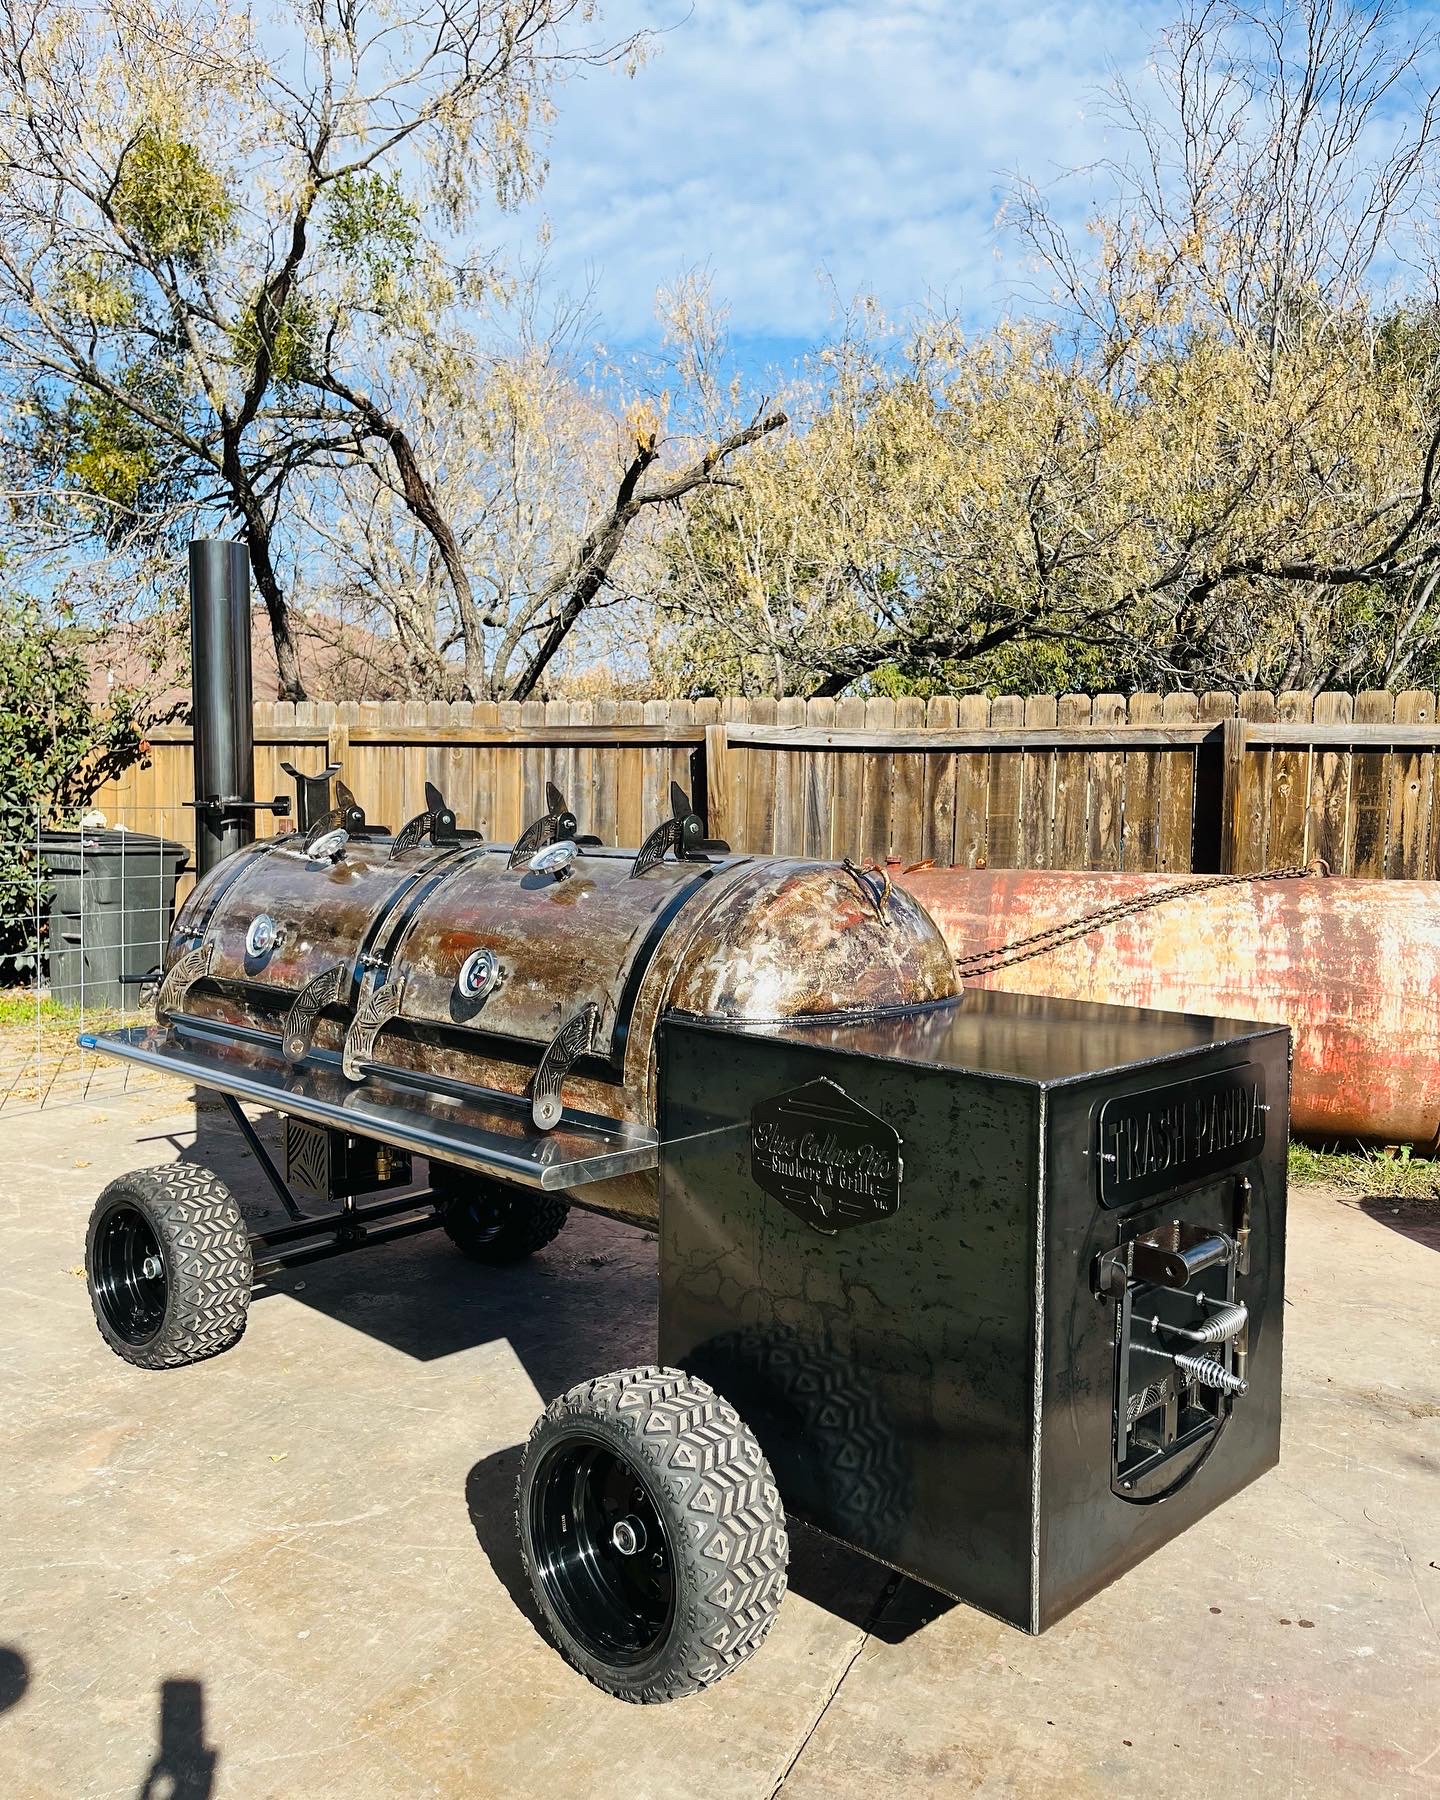 https://bluecollarproducts.com/wp-content/uploads/2021/09/Blue-Collar-Pits-Smokers-and-Grills%E2%84%A2-1-1-23-04.jpg